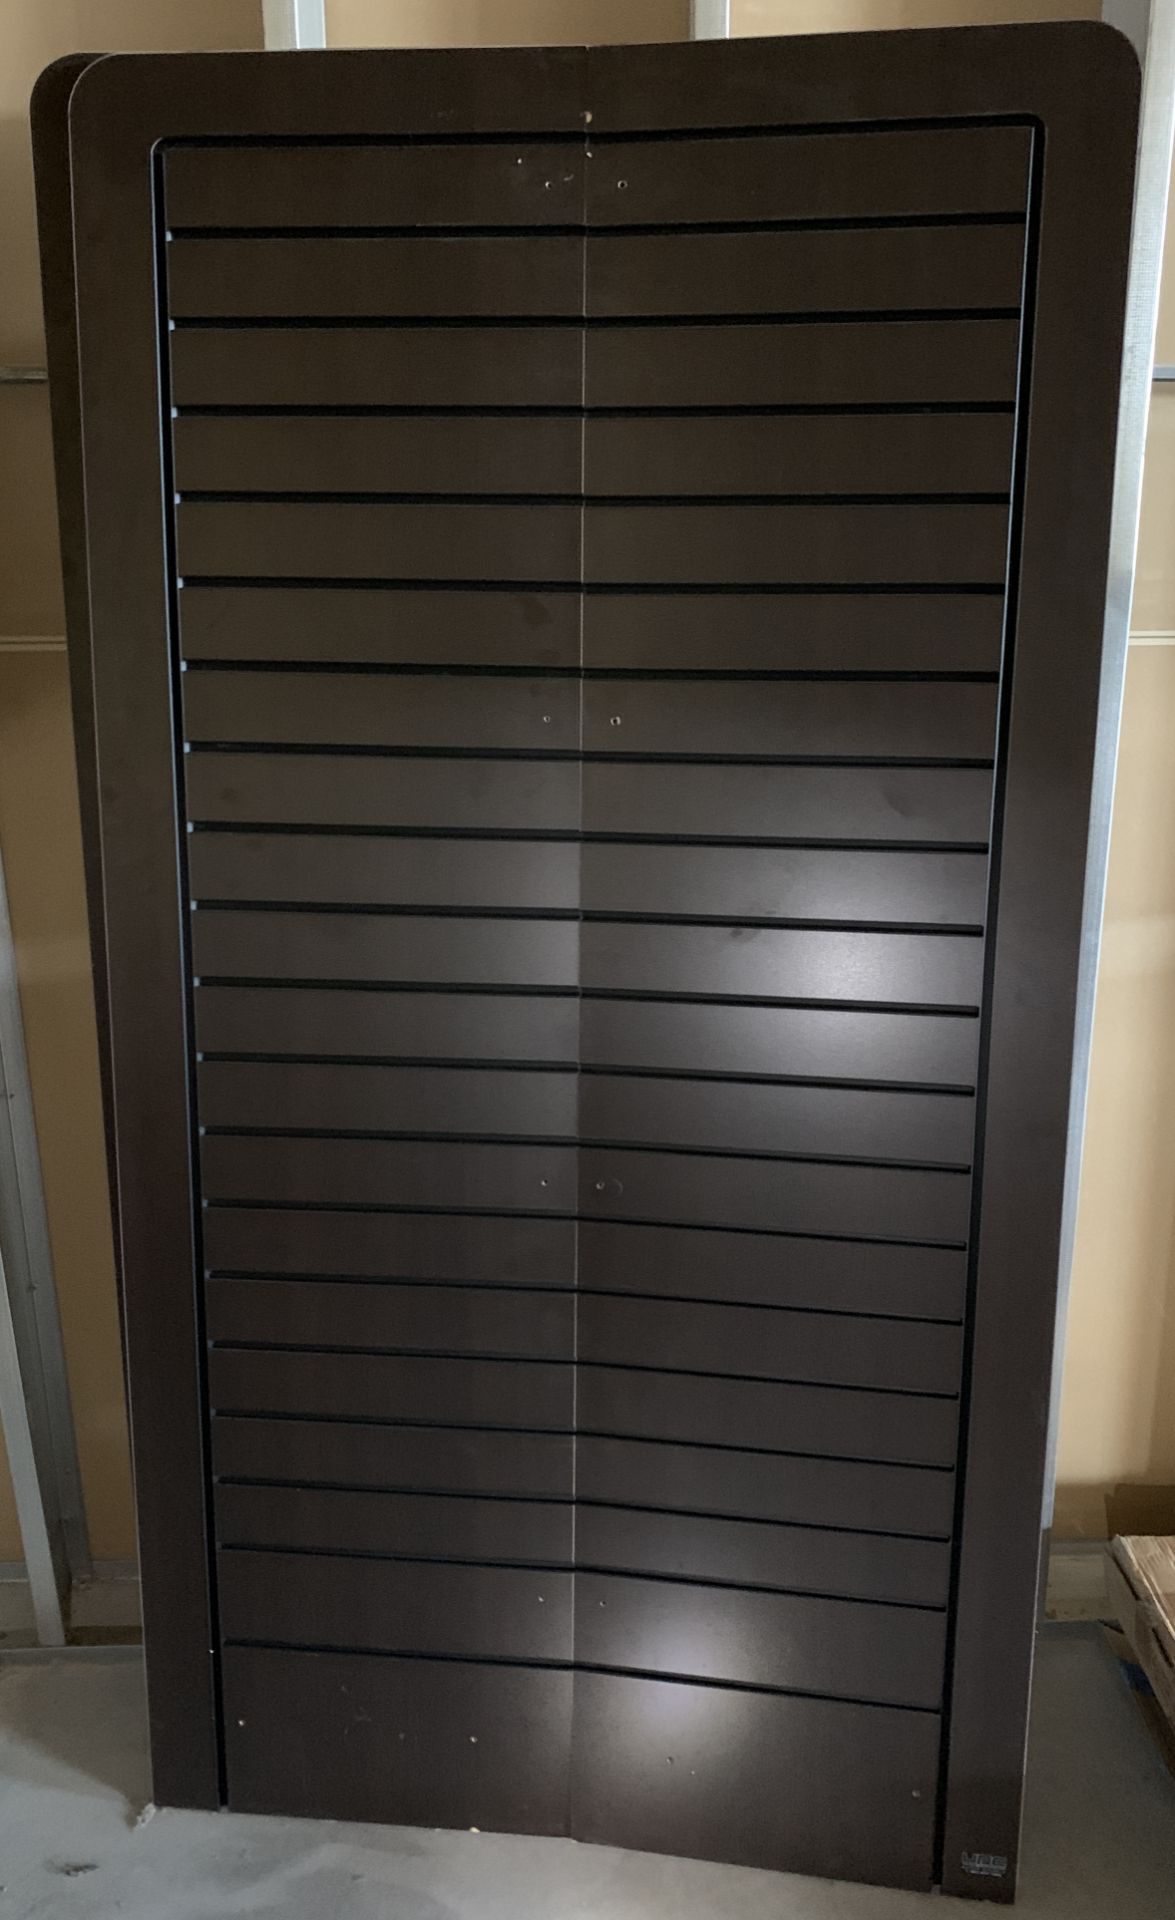 2 Retail Slat Wall Displays, about 6' tall and 3' wide**If won, available for Las Vegas pick up only - Image 2 of 2